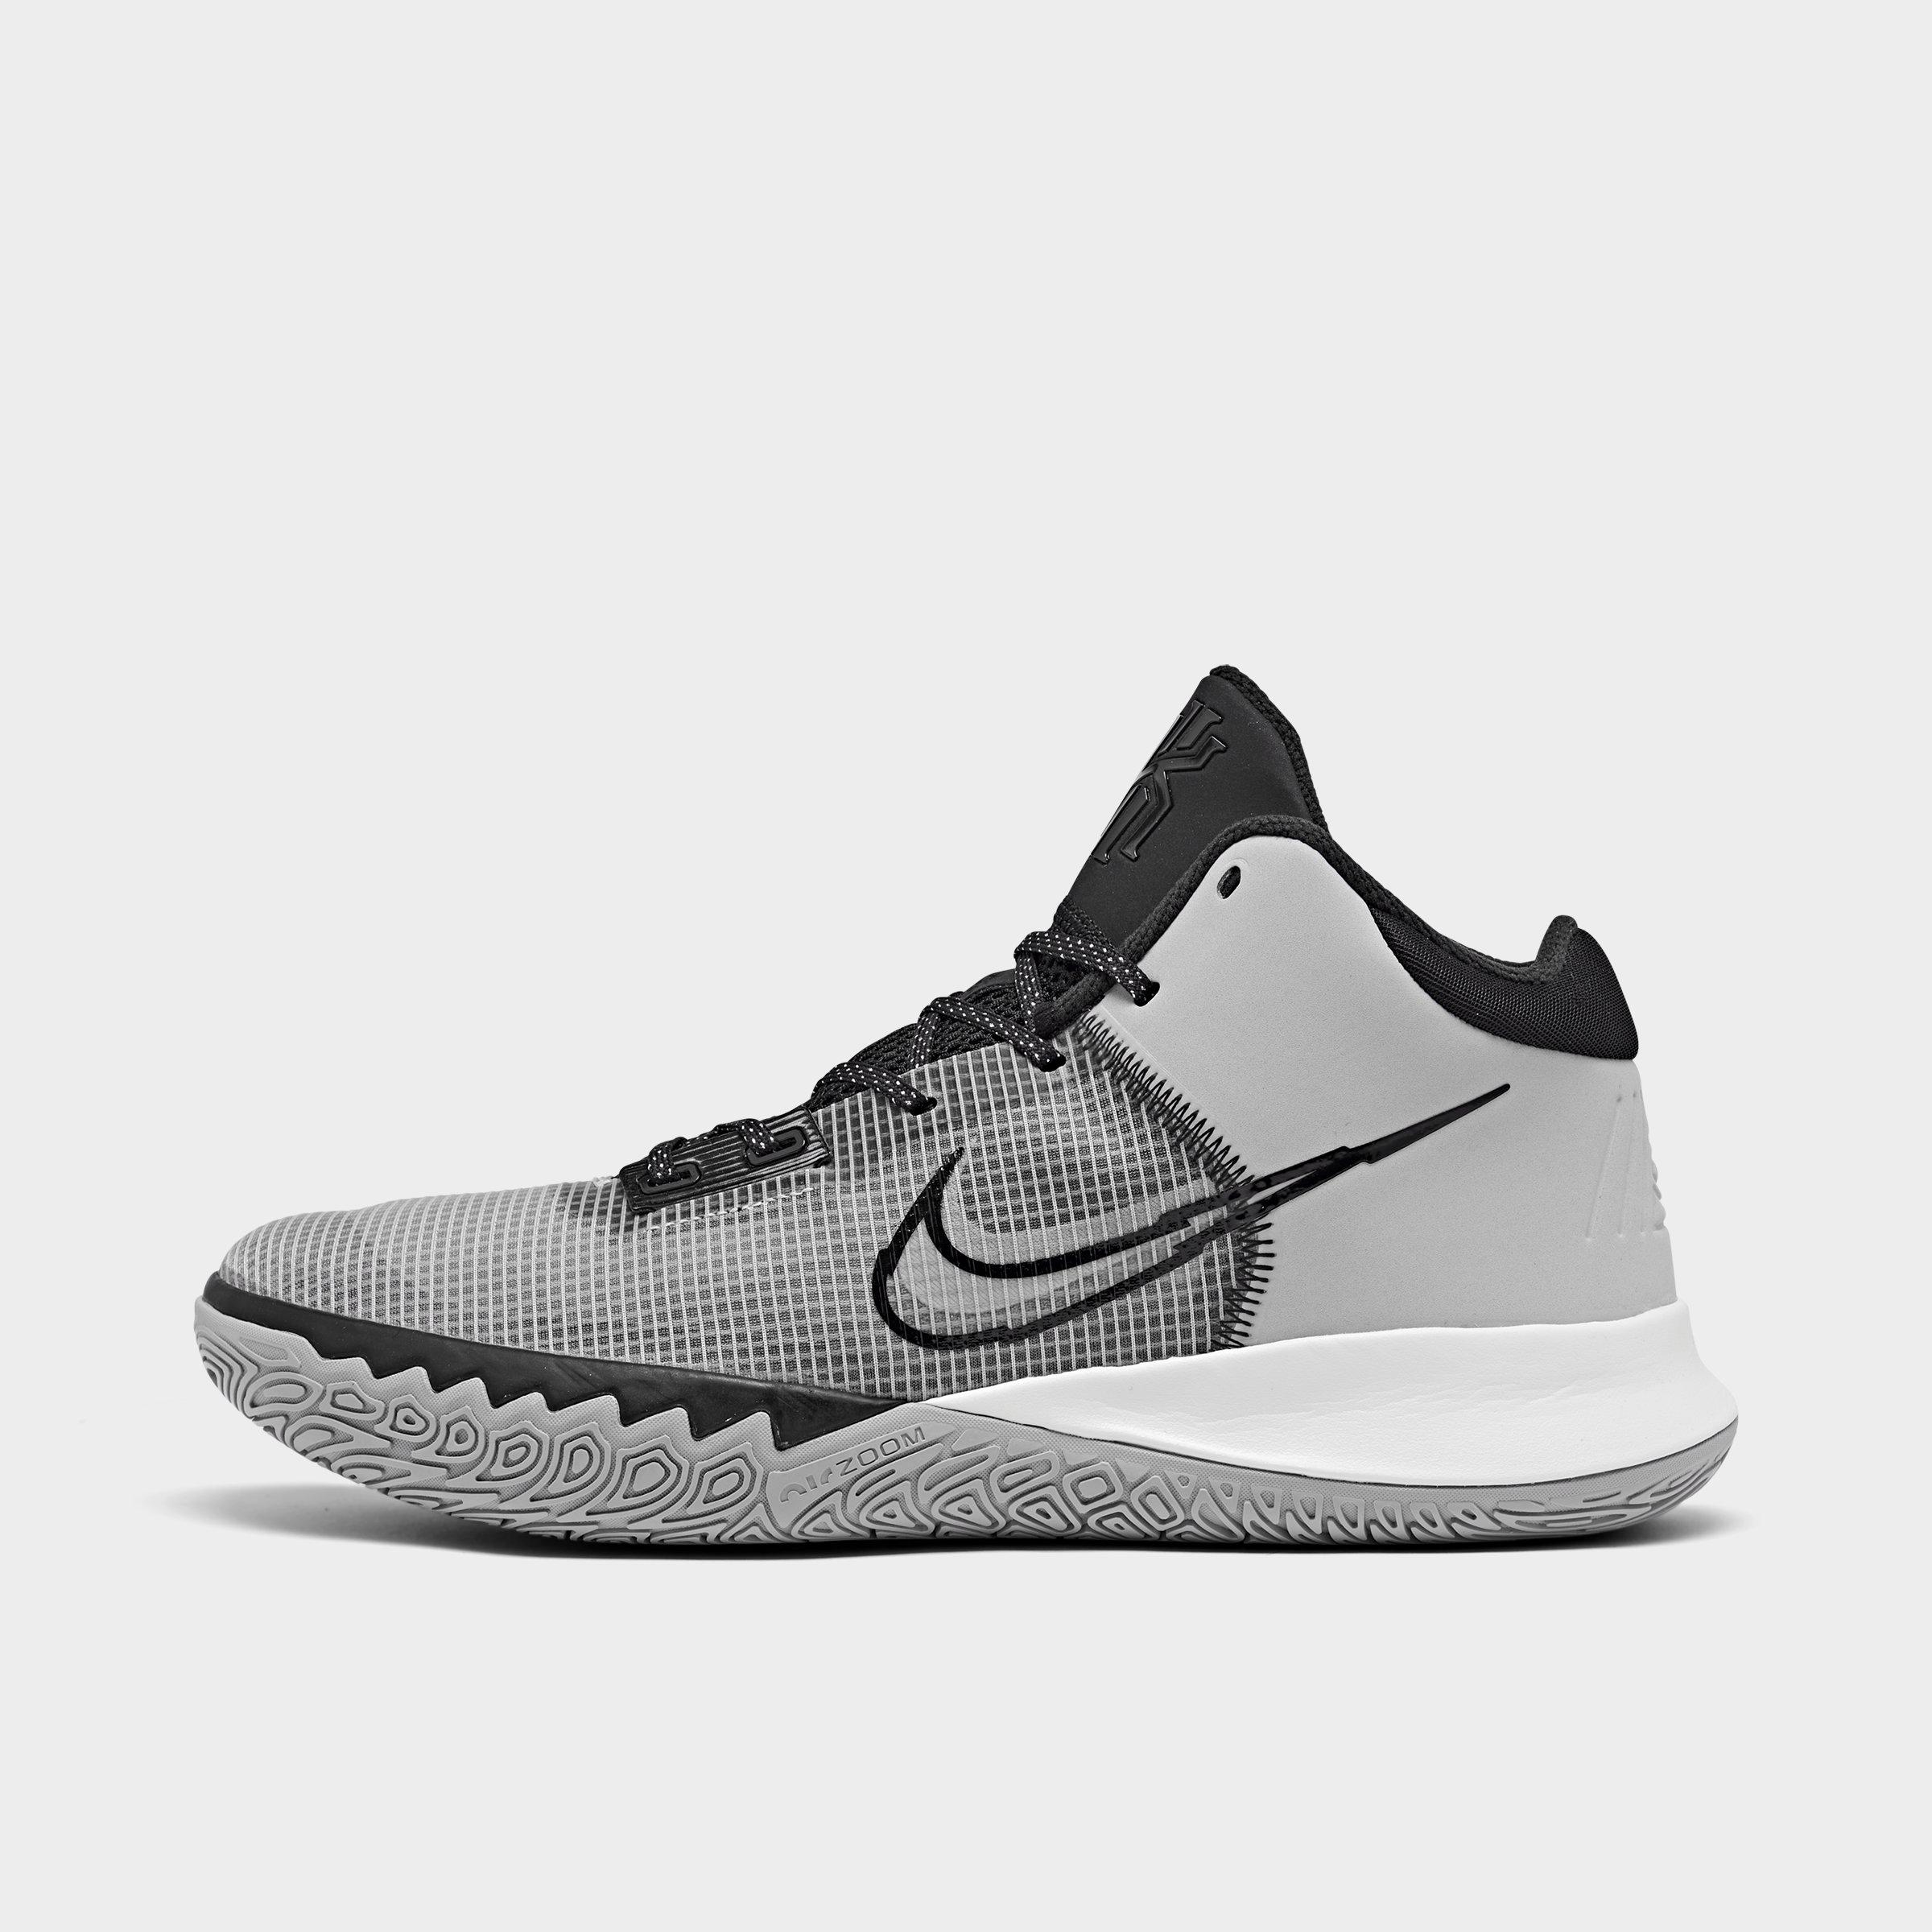 Kyrie Irving Shoes | Nike Kyrie 